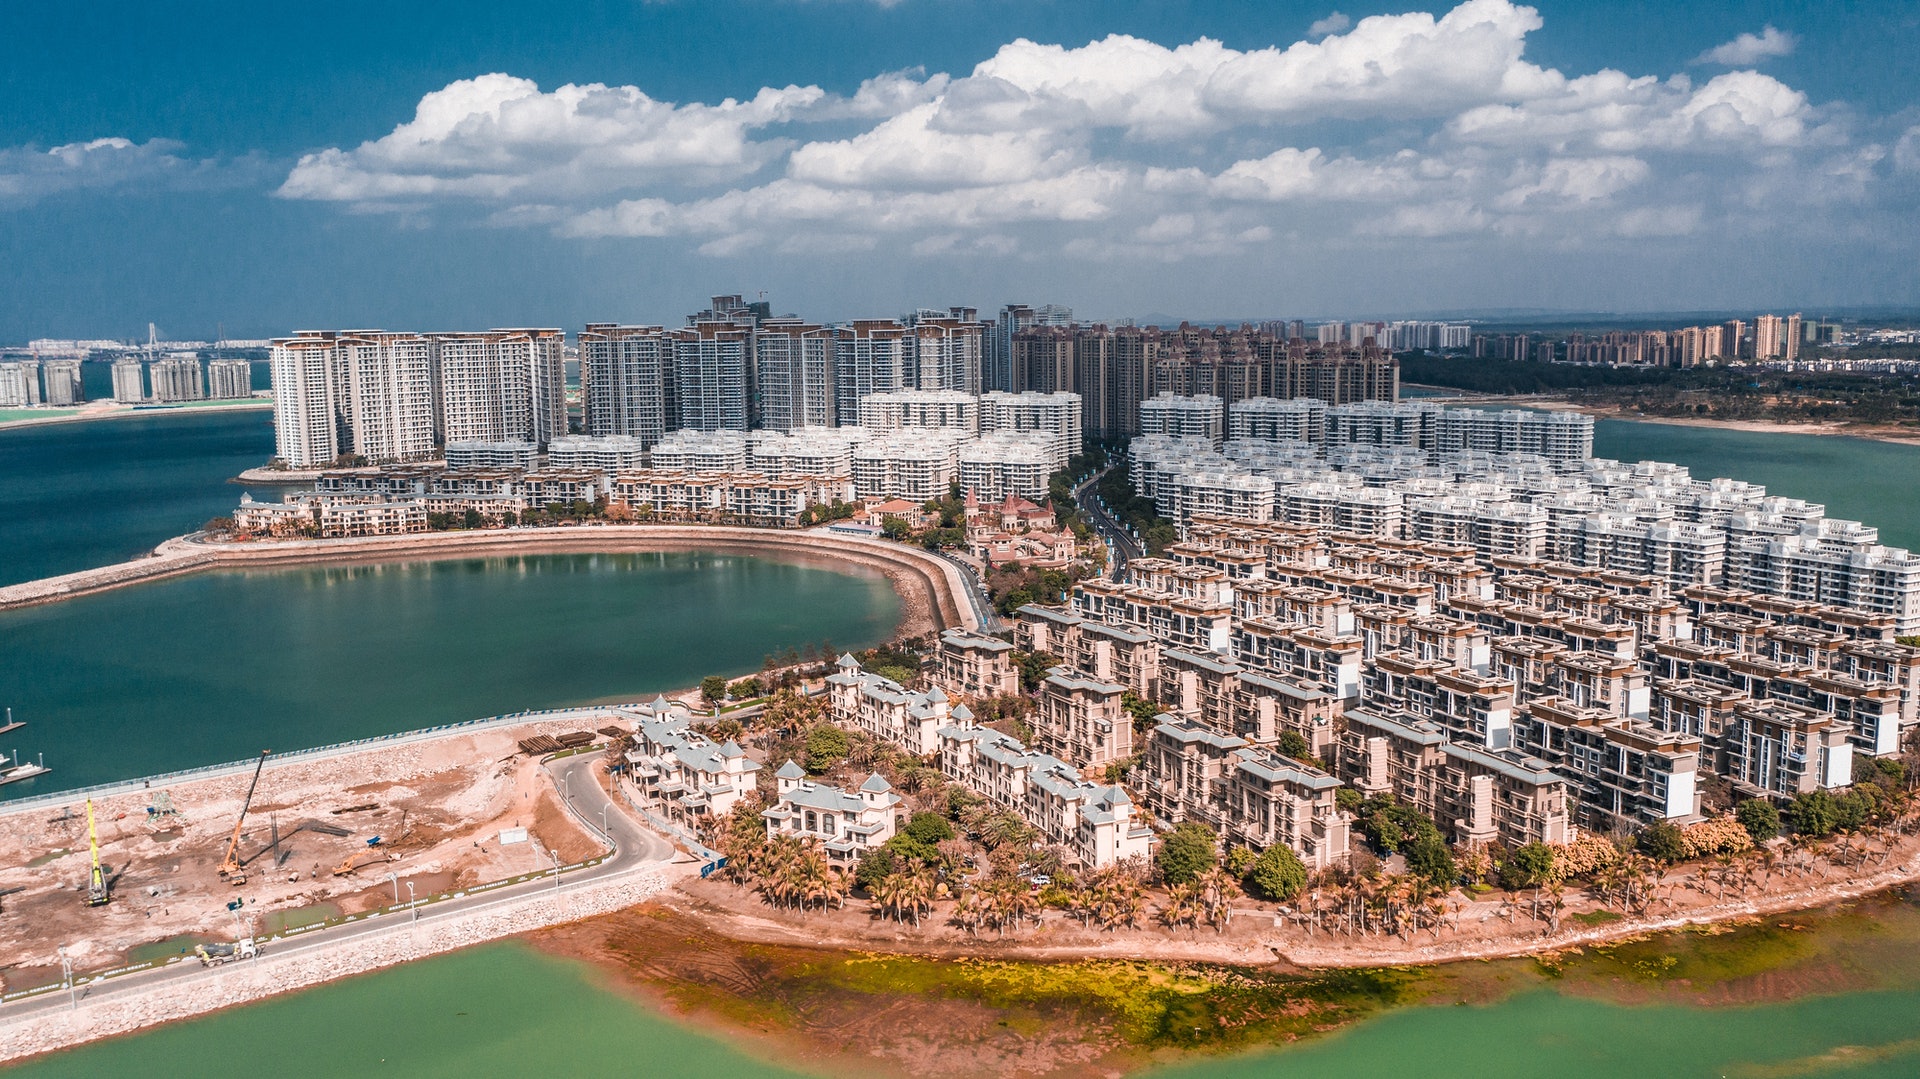 China Evergrande ordered to demolish 39 residential buildings in Hainan within ten days